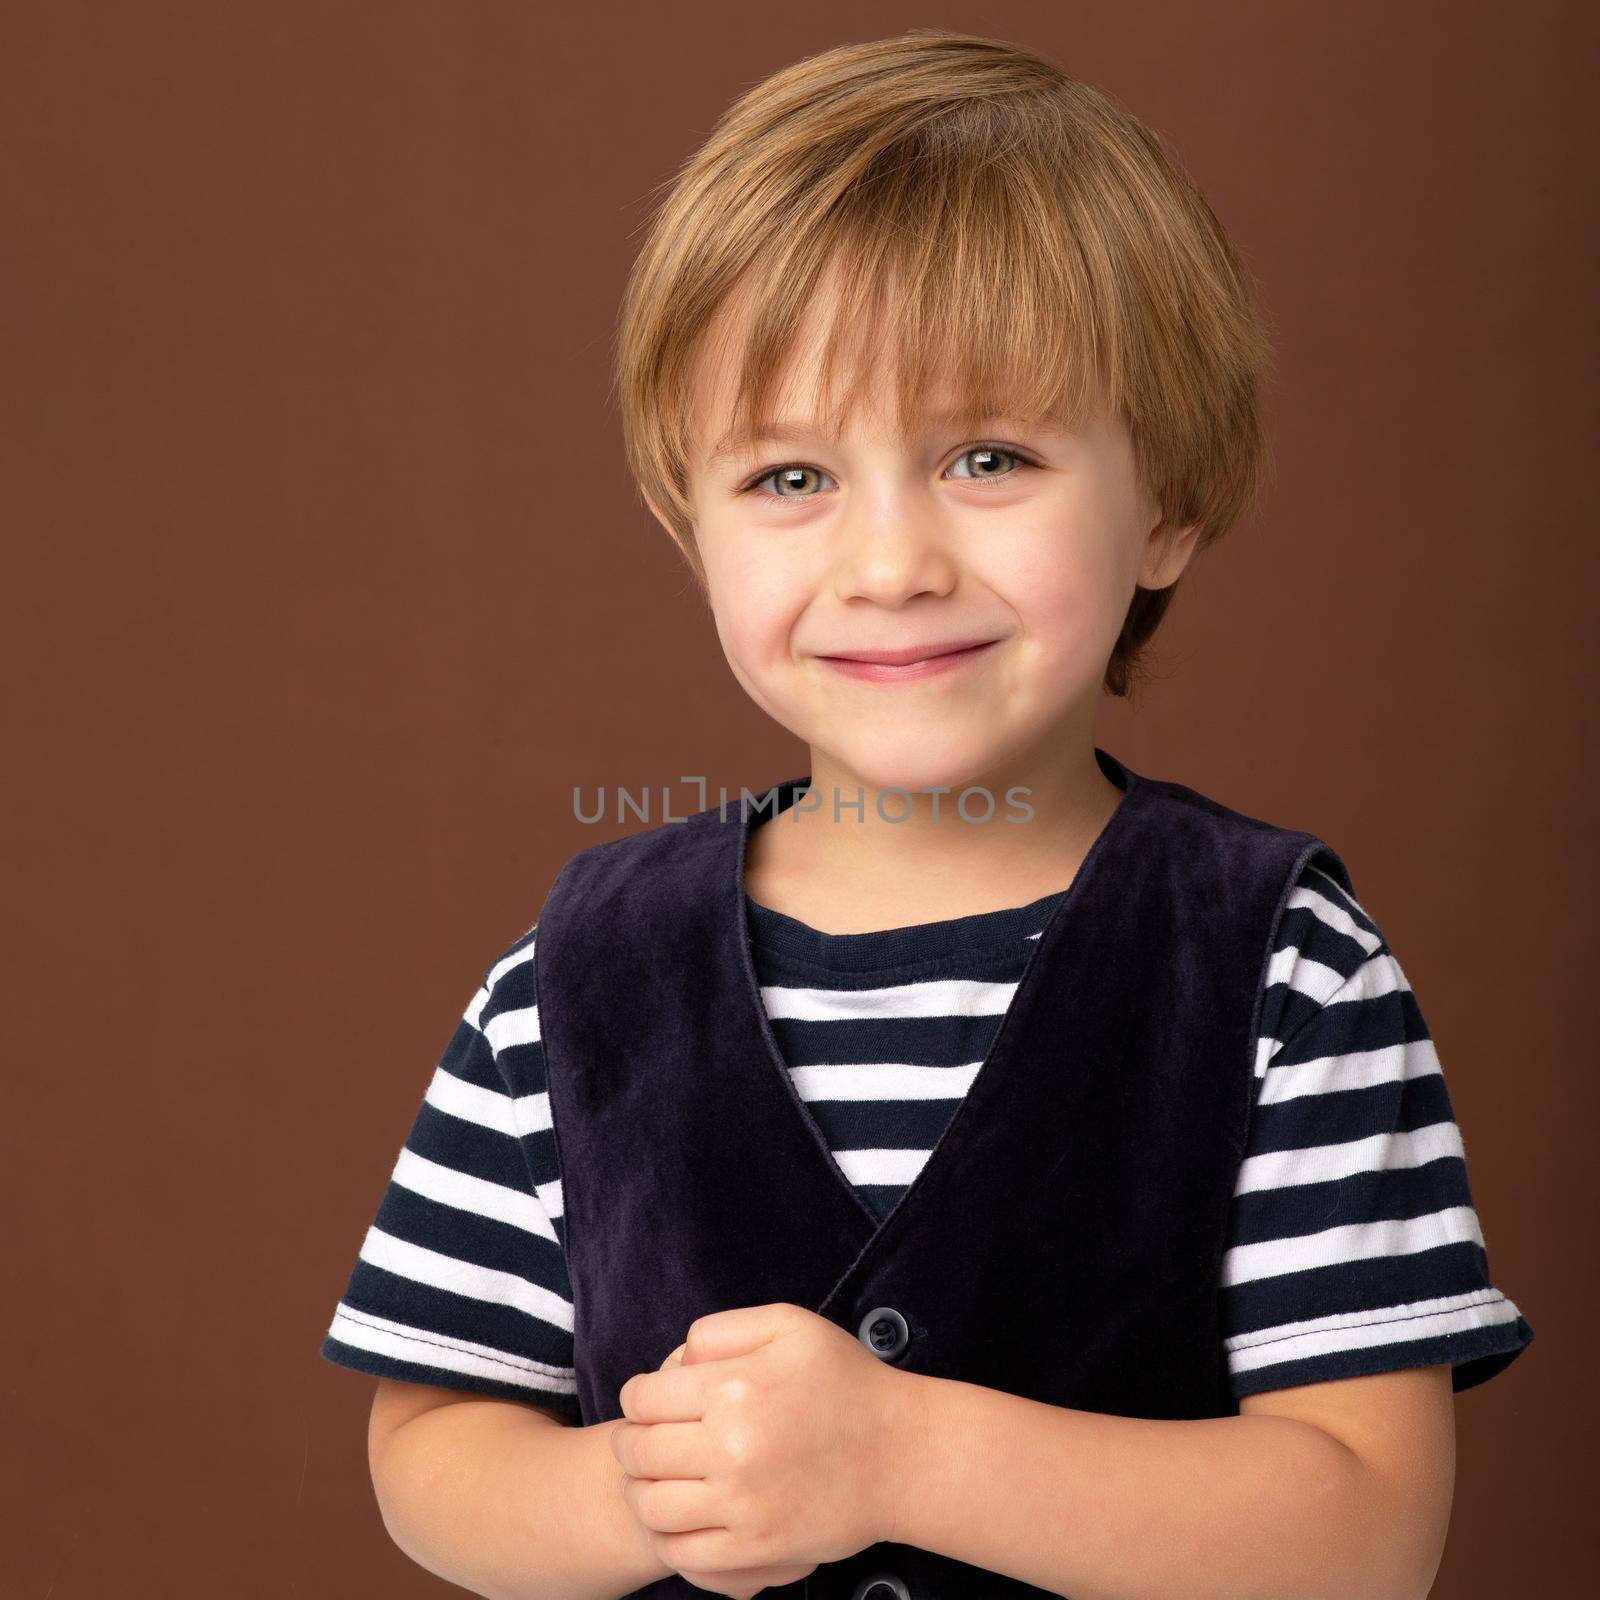 Portrait of happy joyful little boy. Lovely smiling kid wearing striiped t-shirt and blue velvet vest standing on brown background. Cheerful little boy in stylish trendy clothes